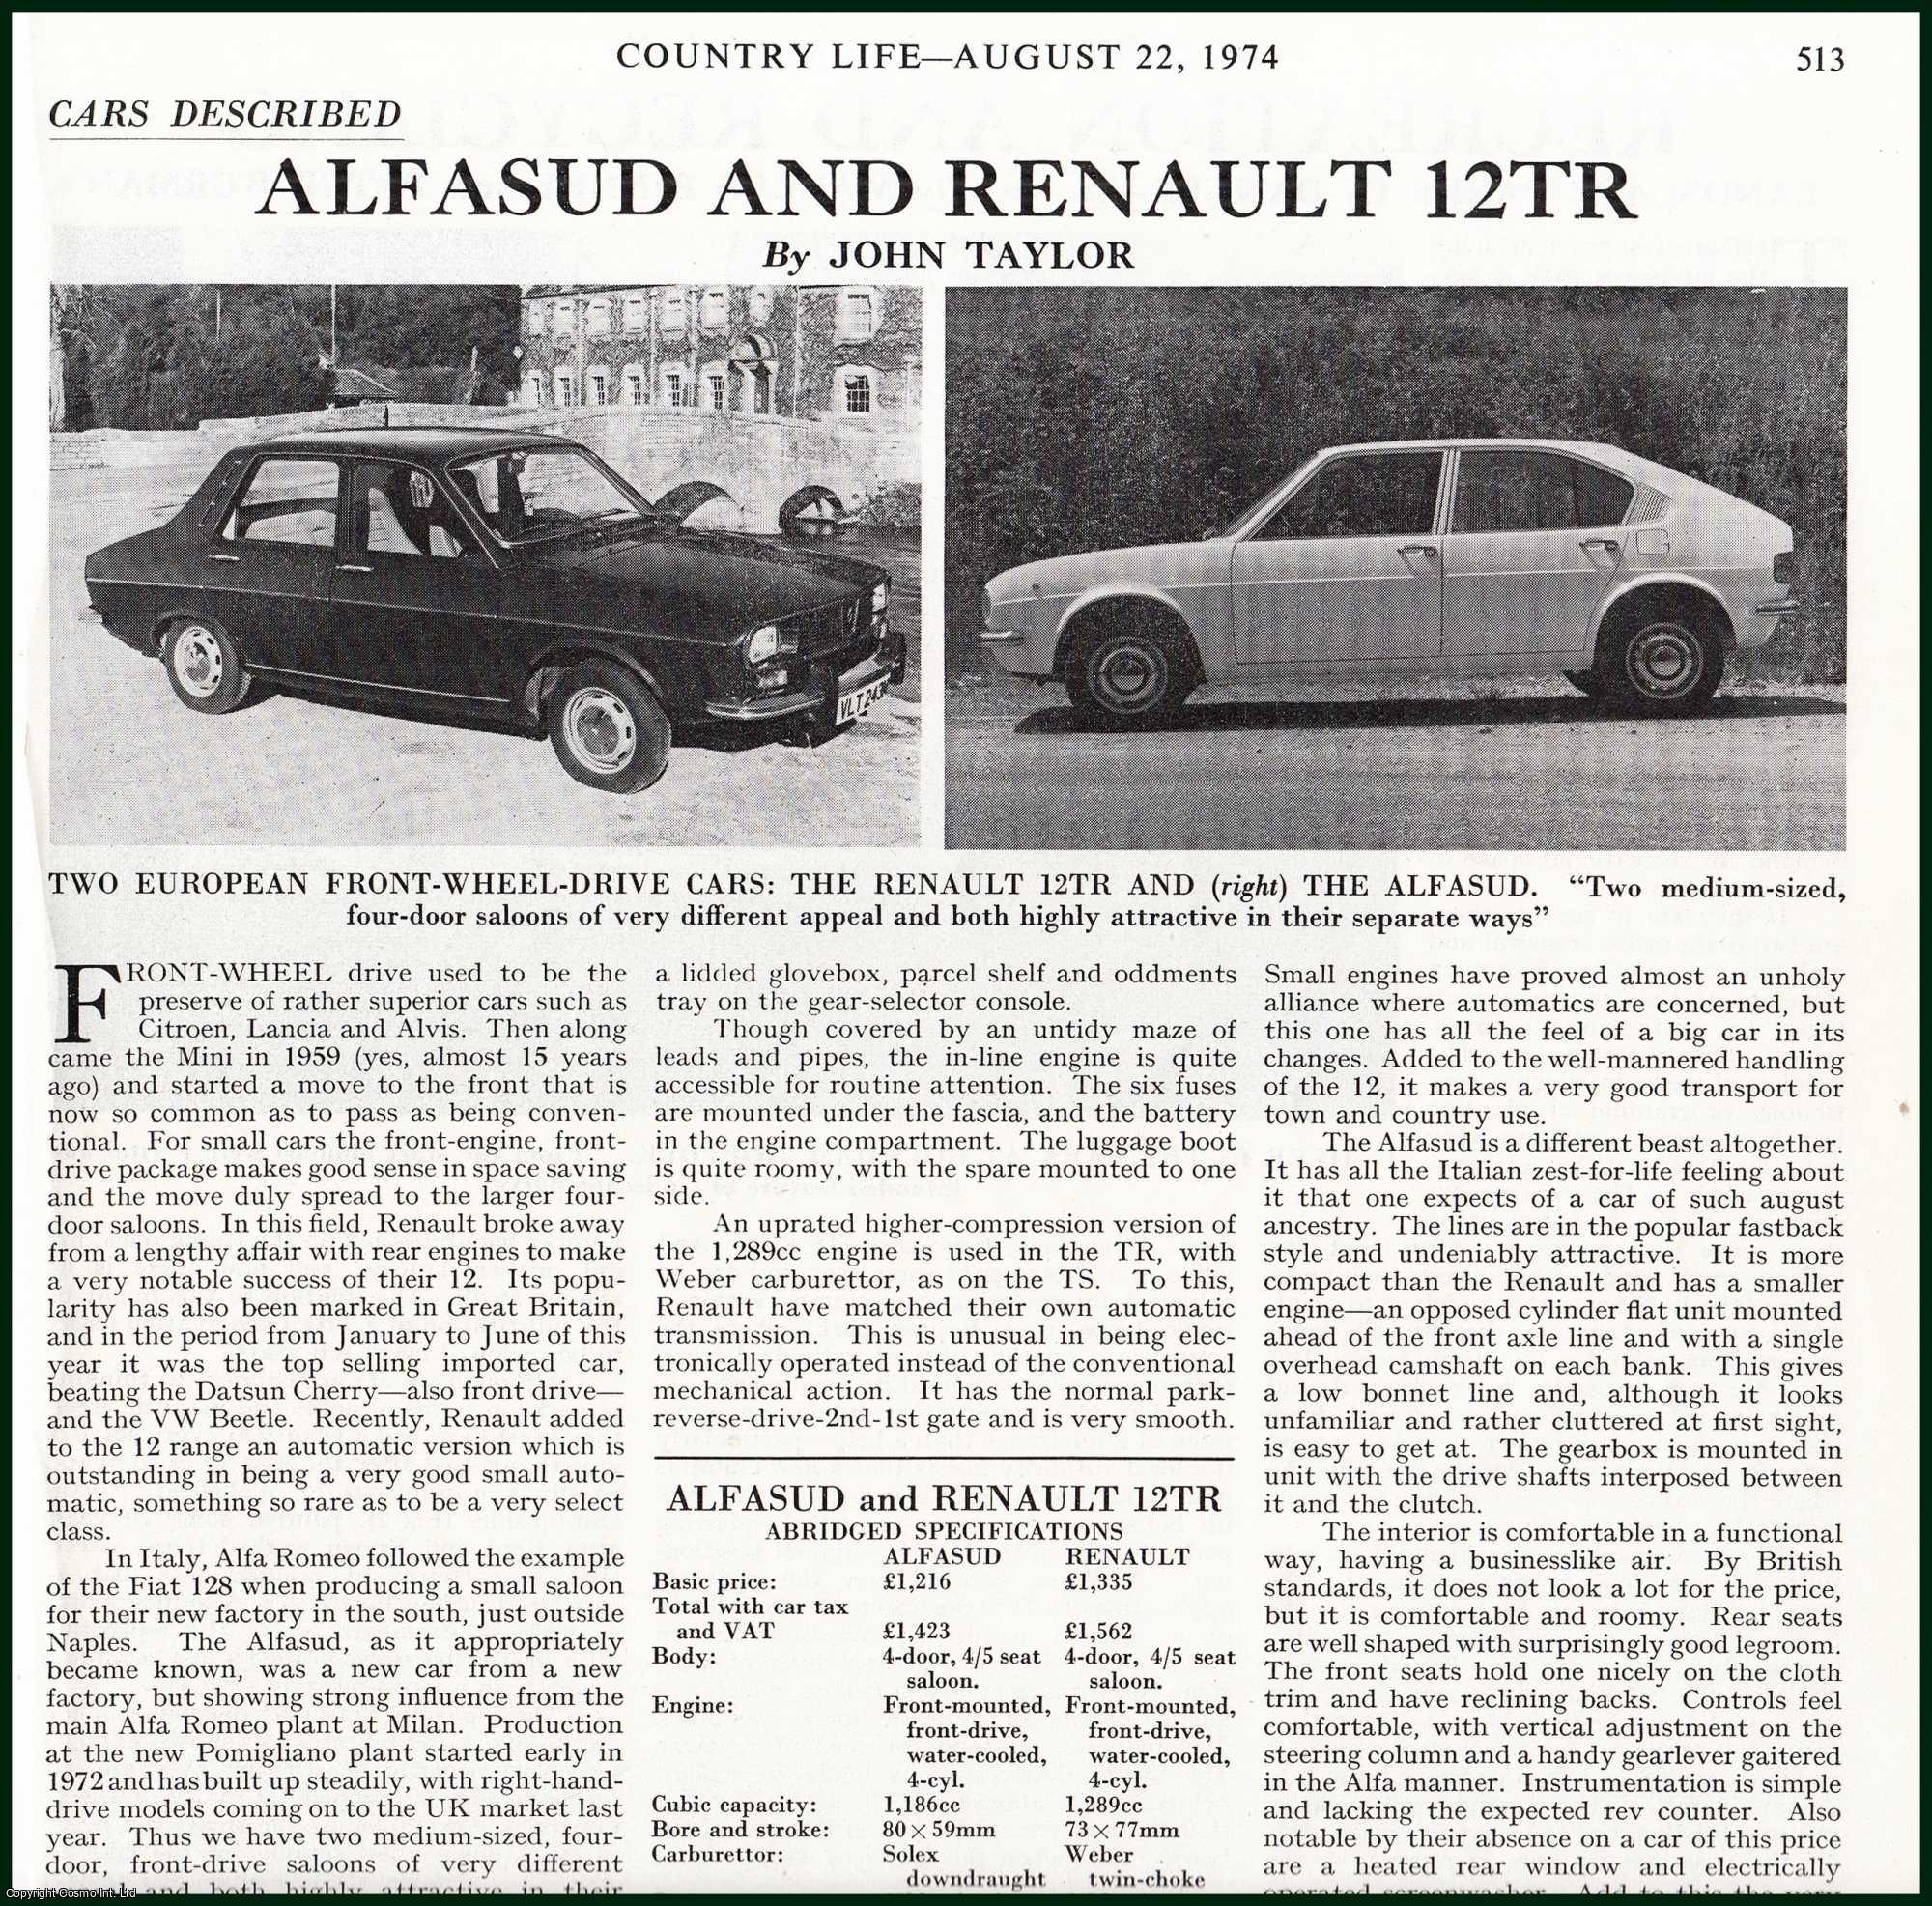 Country Life Magazine - Alfasud & Renault 12TR : Two European Front-Wheel-Drive Cars. Two pictures and accompanying text, removed from an original issue of Country Life Magazine, 1974.